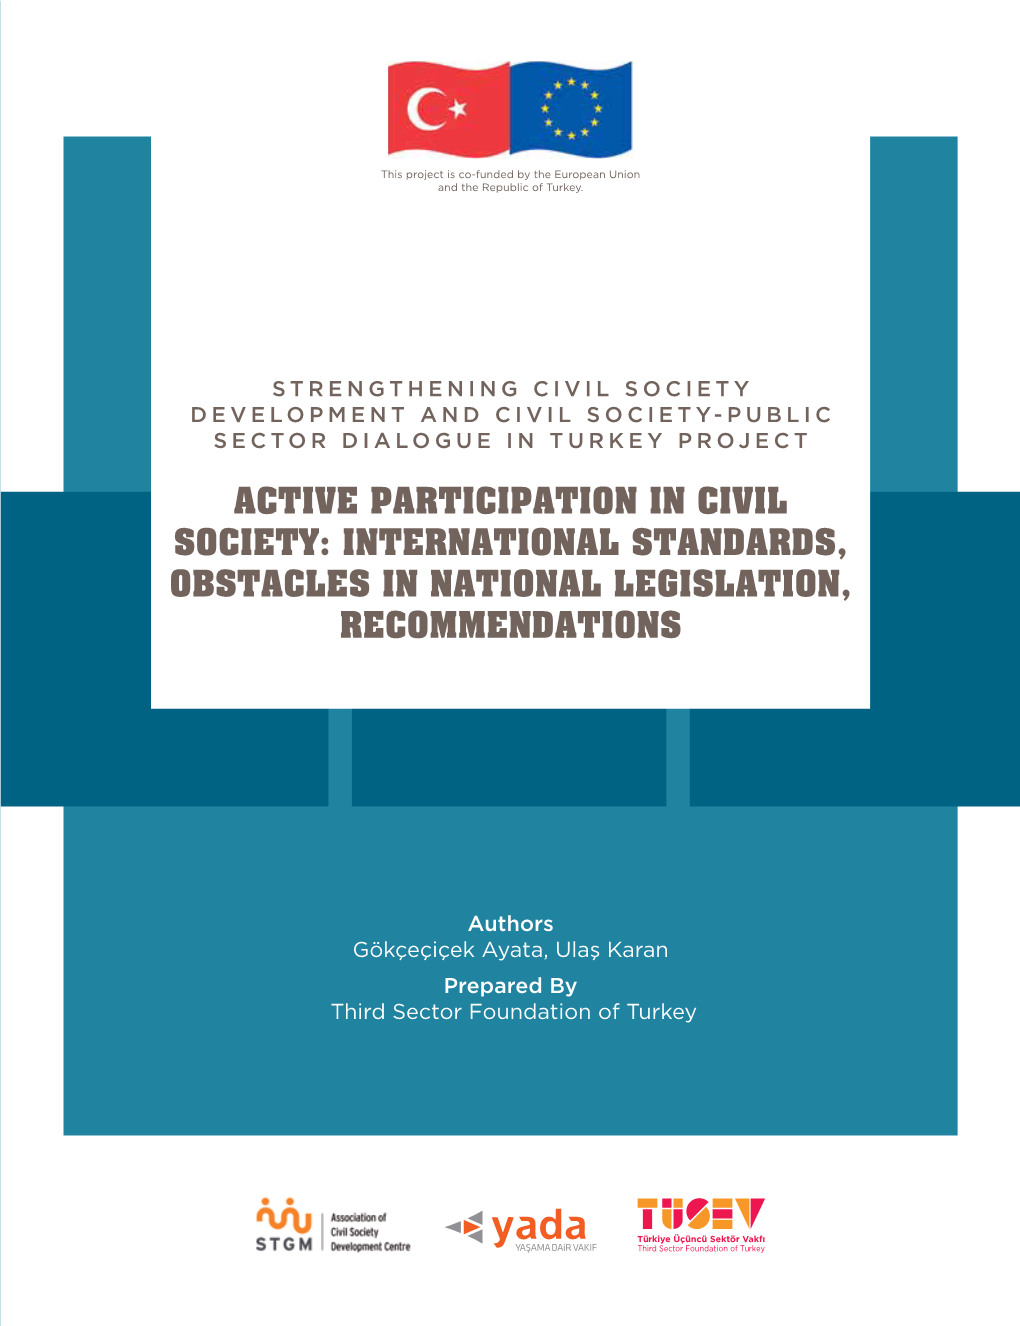 Active Participation in Civil Society: International Standards, Obstacles in National Legislation, Recommendations